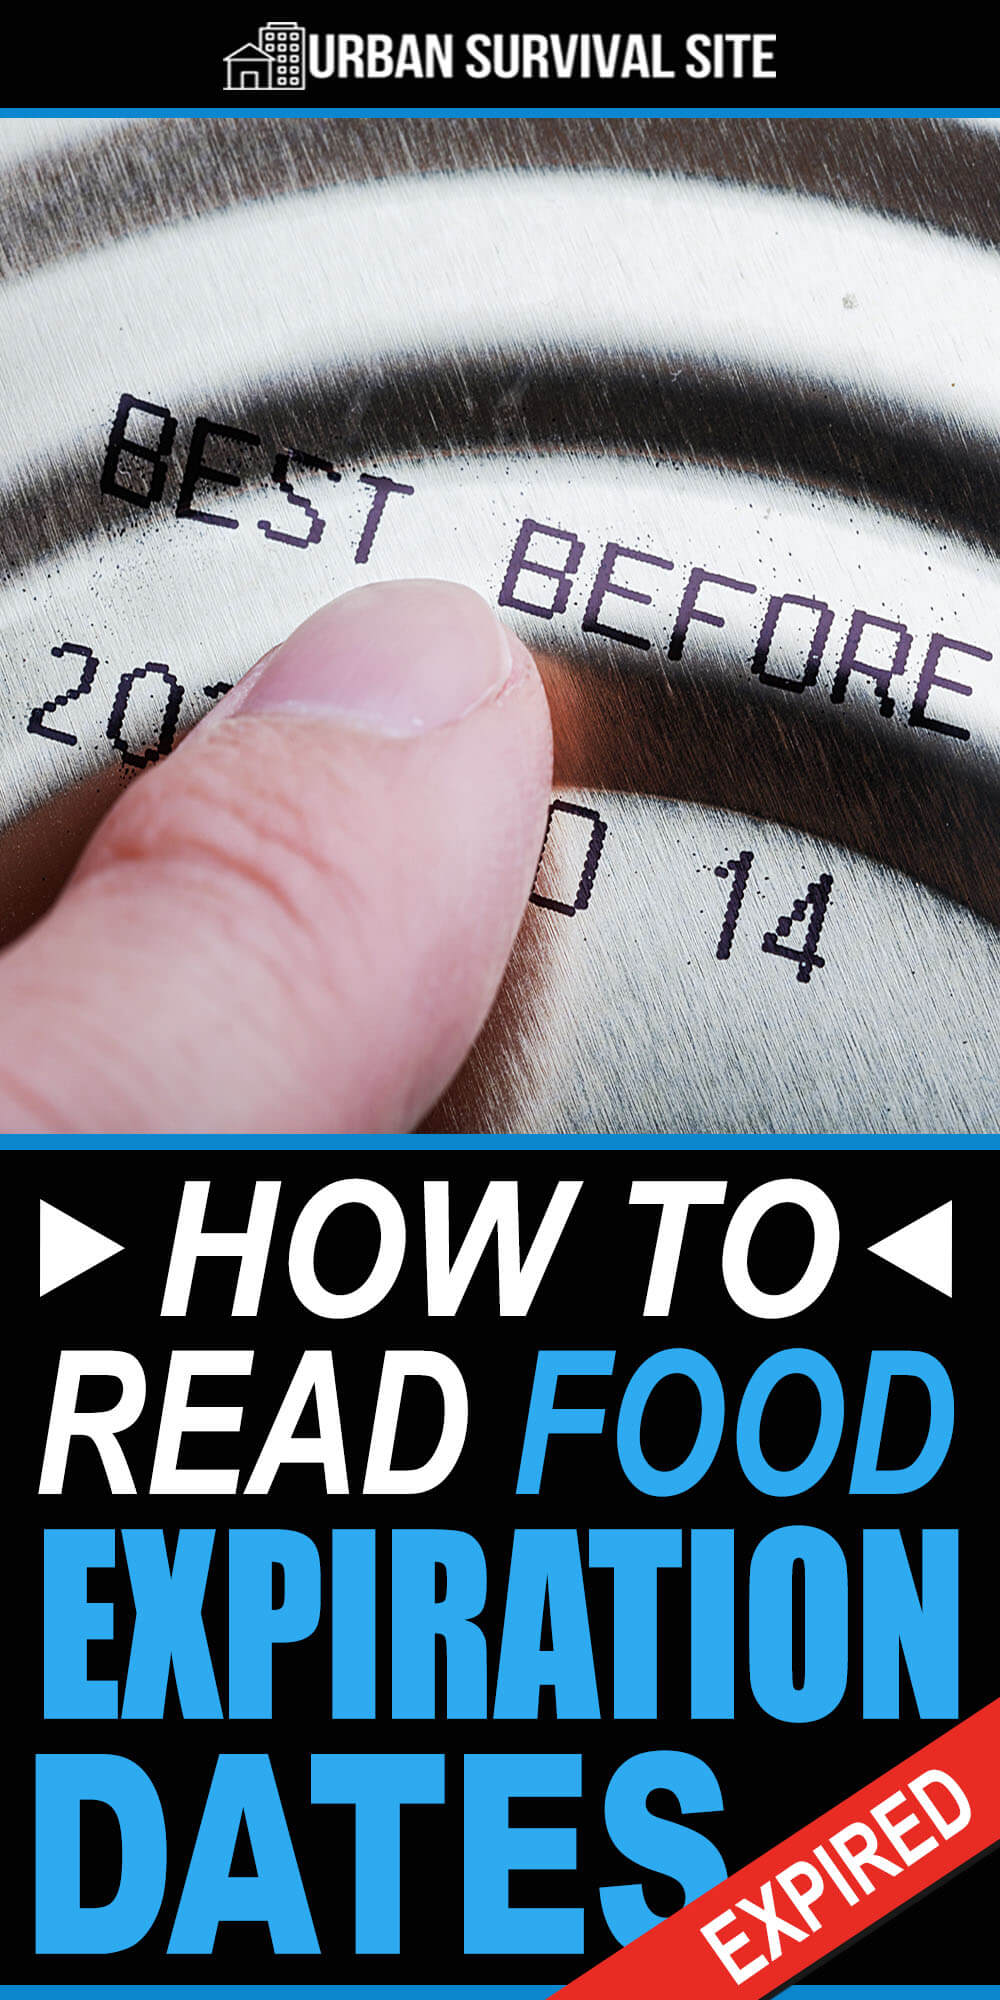 How To Read Food Expiration Dates